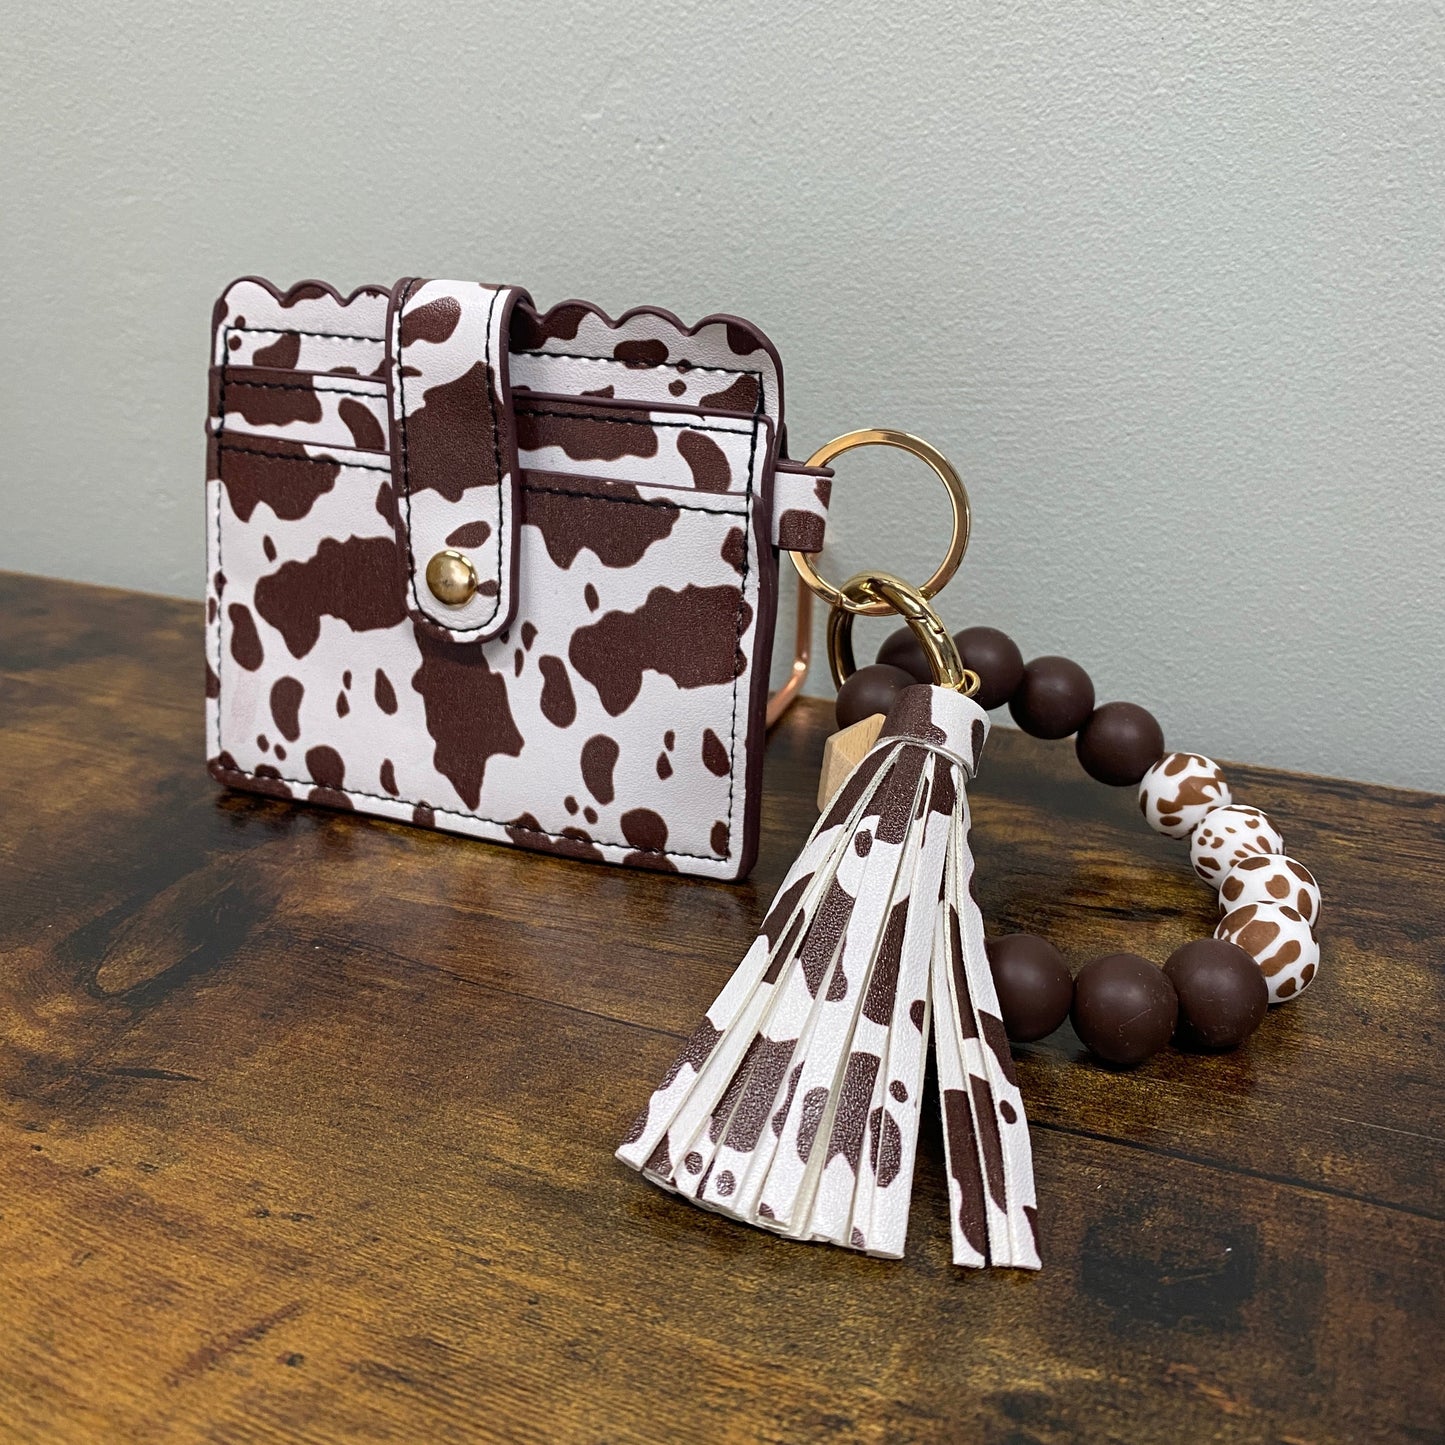 Silicone Bracelet Keychain with Brown Cow Print Scalloped Card Holder